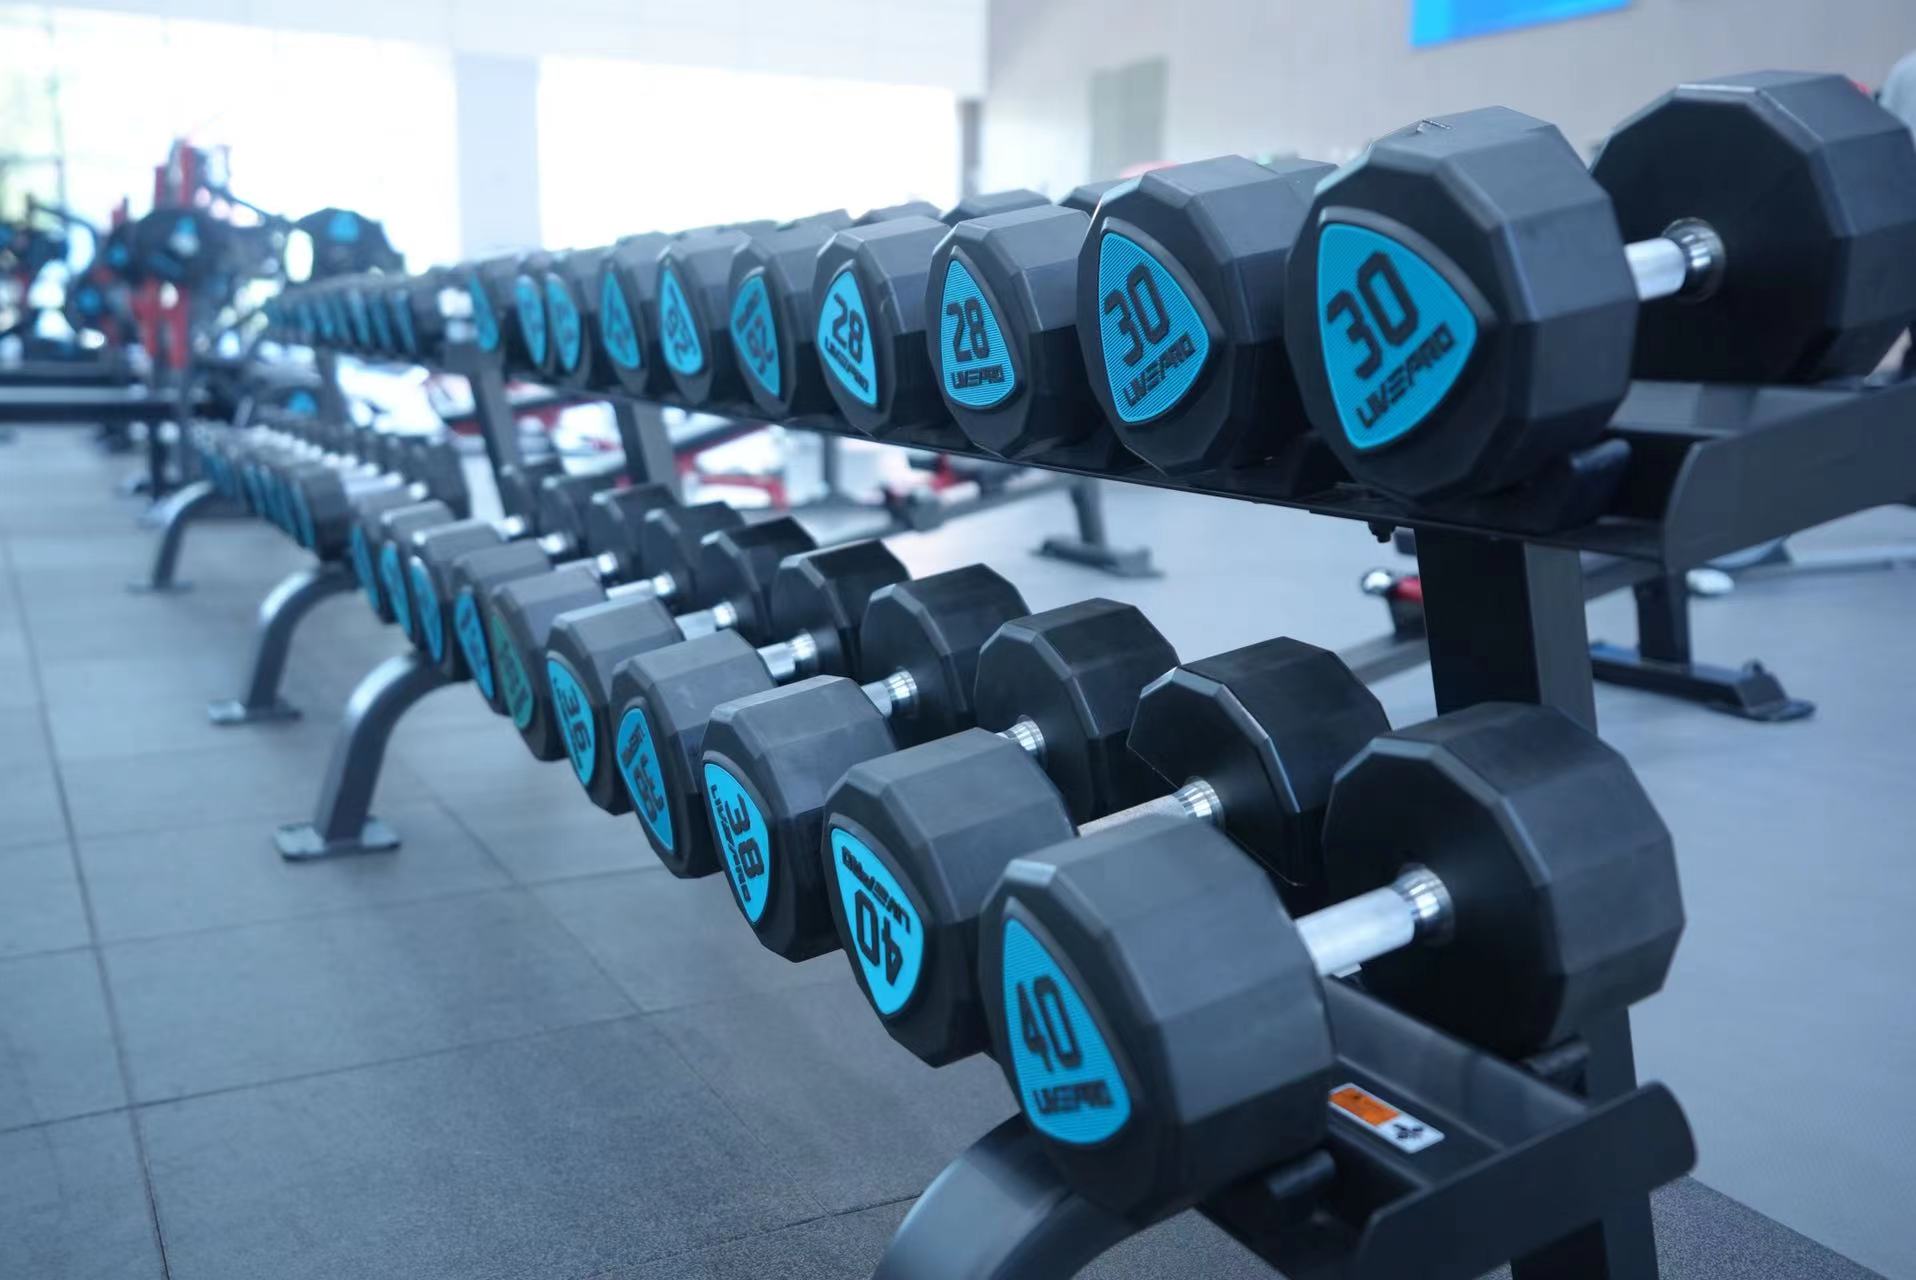 Gym equipment in the athletes' village for the 31st World University Games in Chengdu, southwest China's Sichuan Province. /CGTN